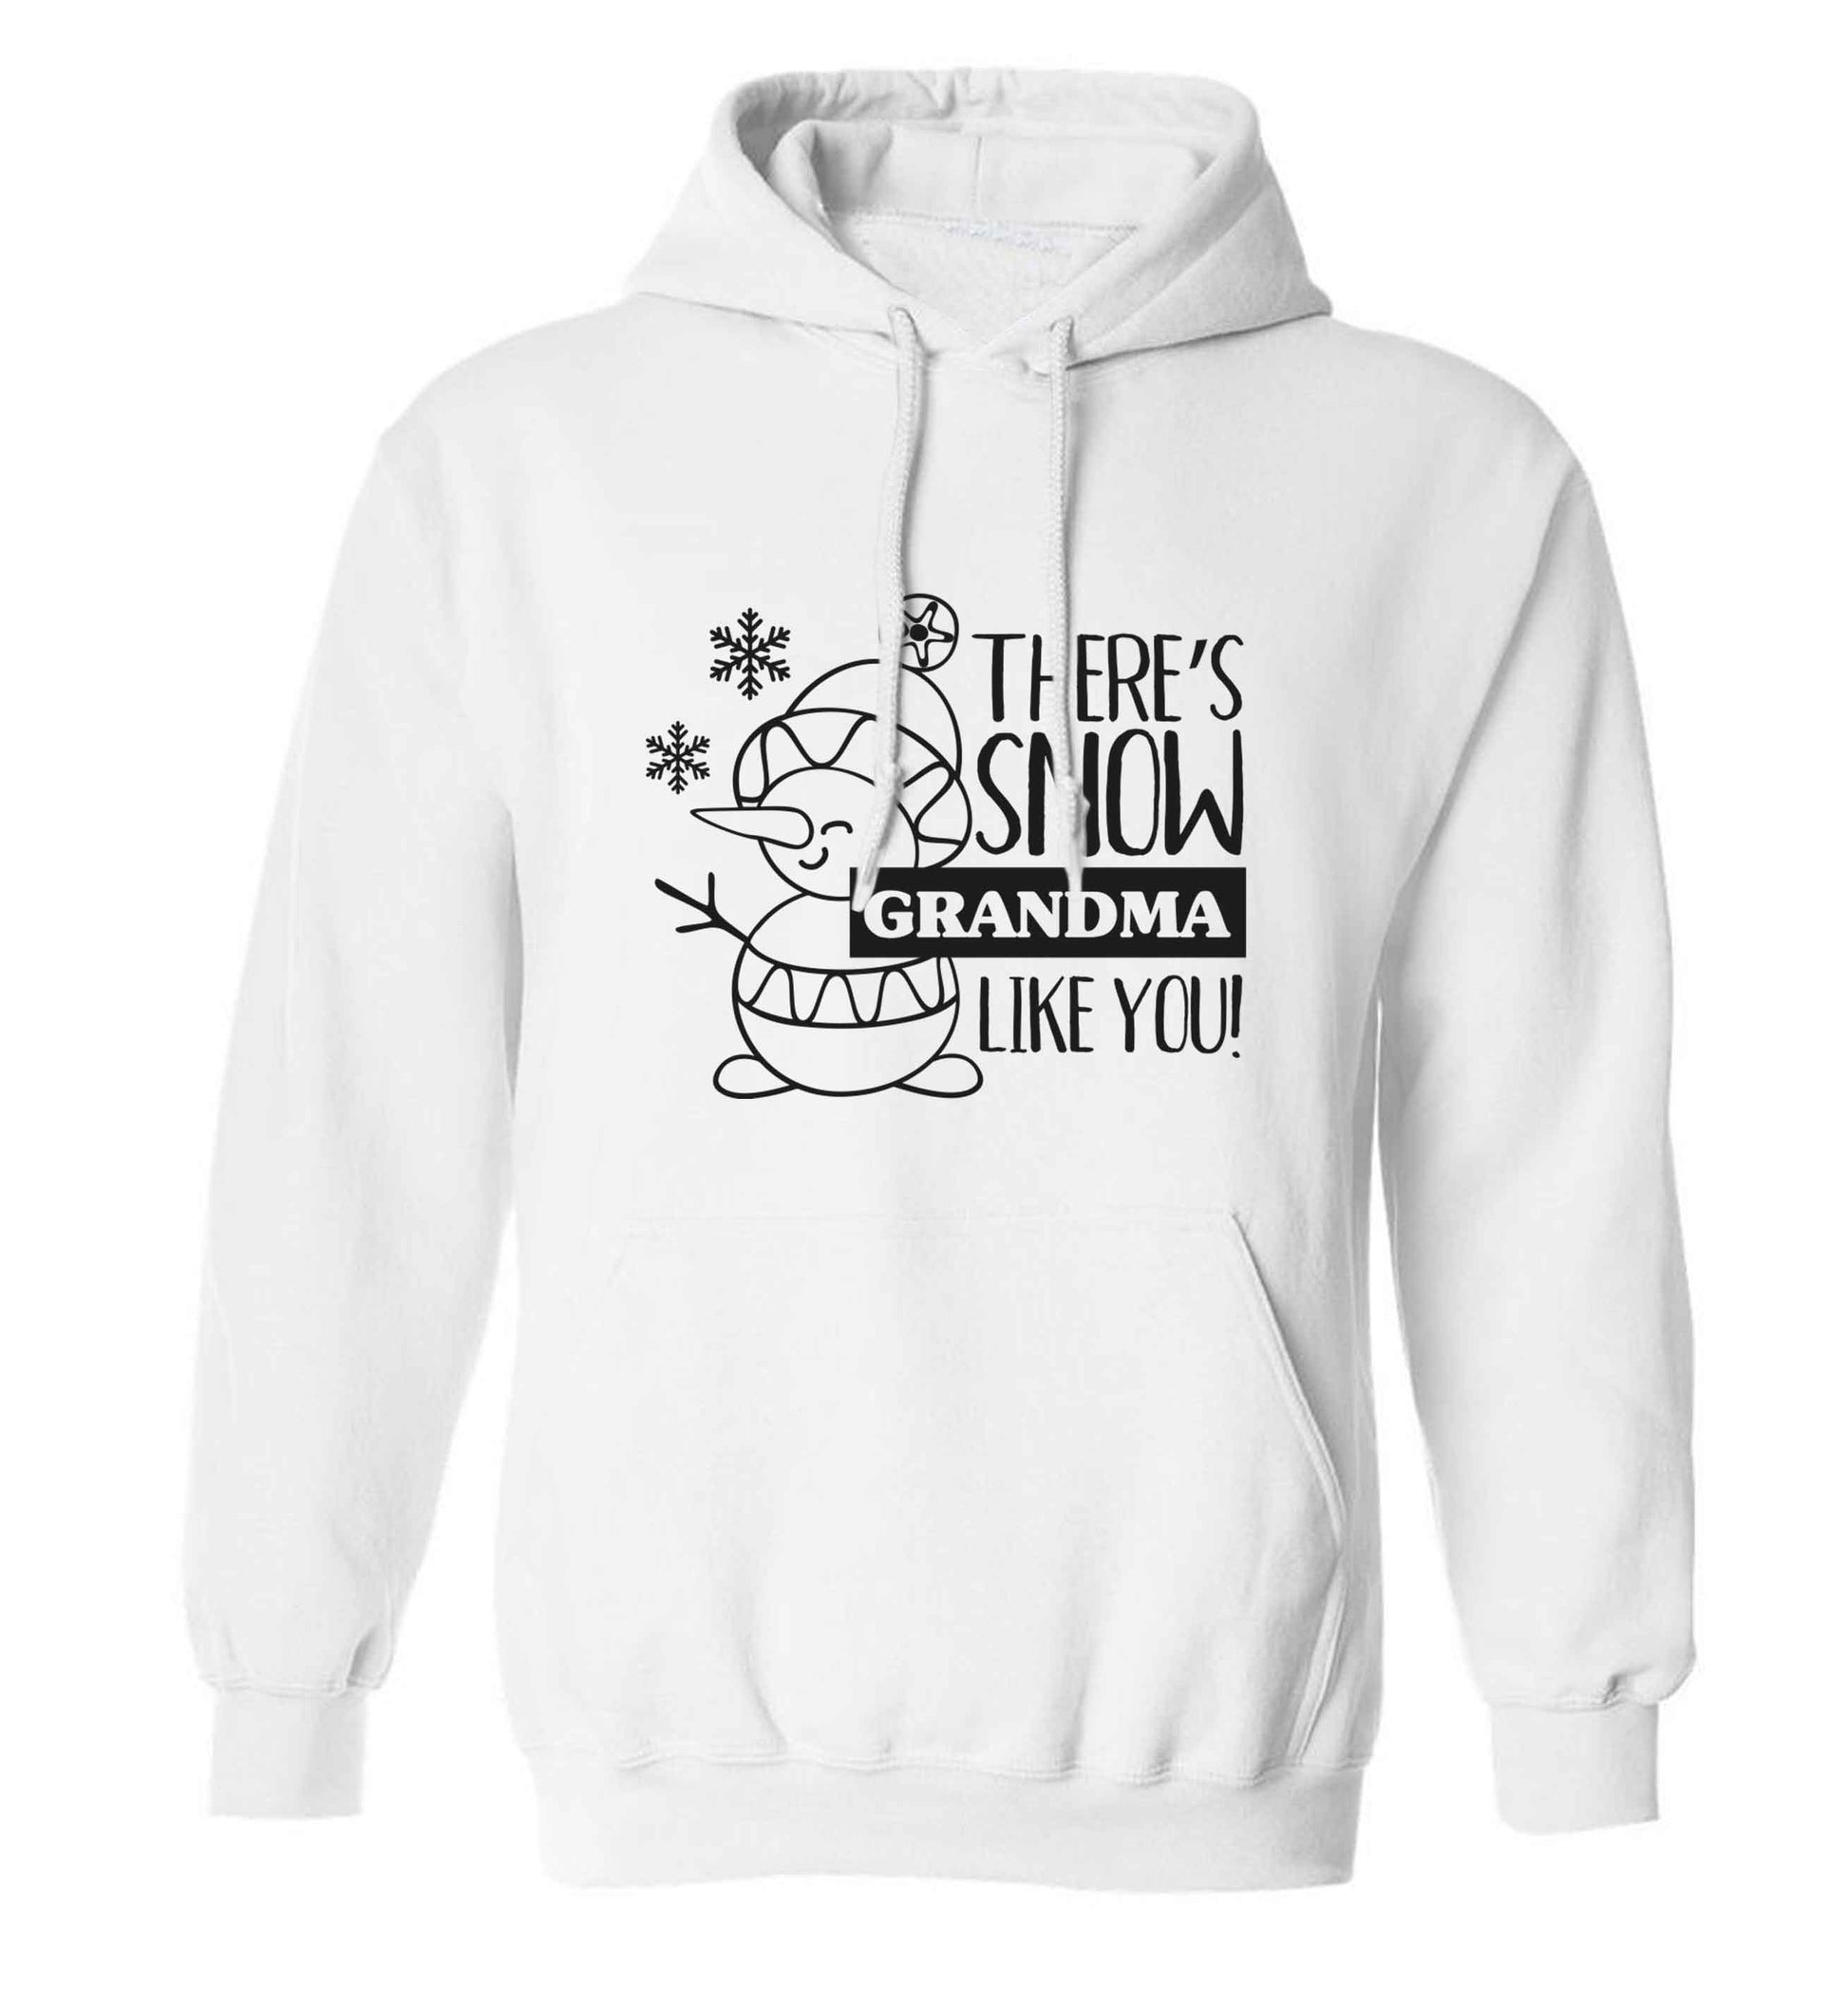 There's snow grandma like you adults unisex white hoodie 2XL